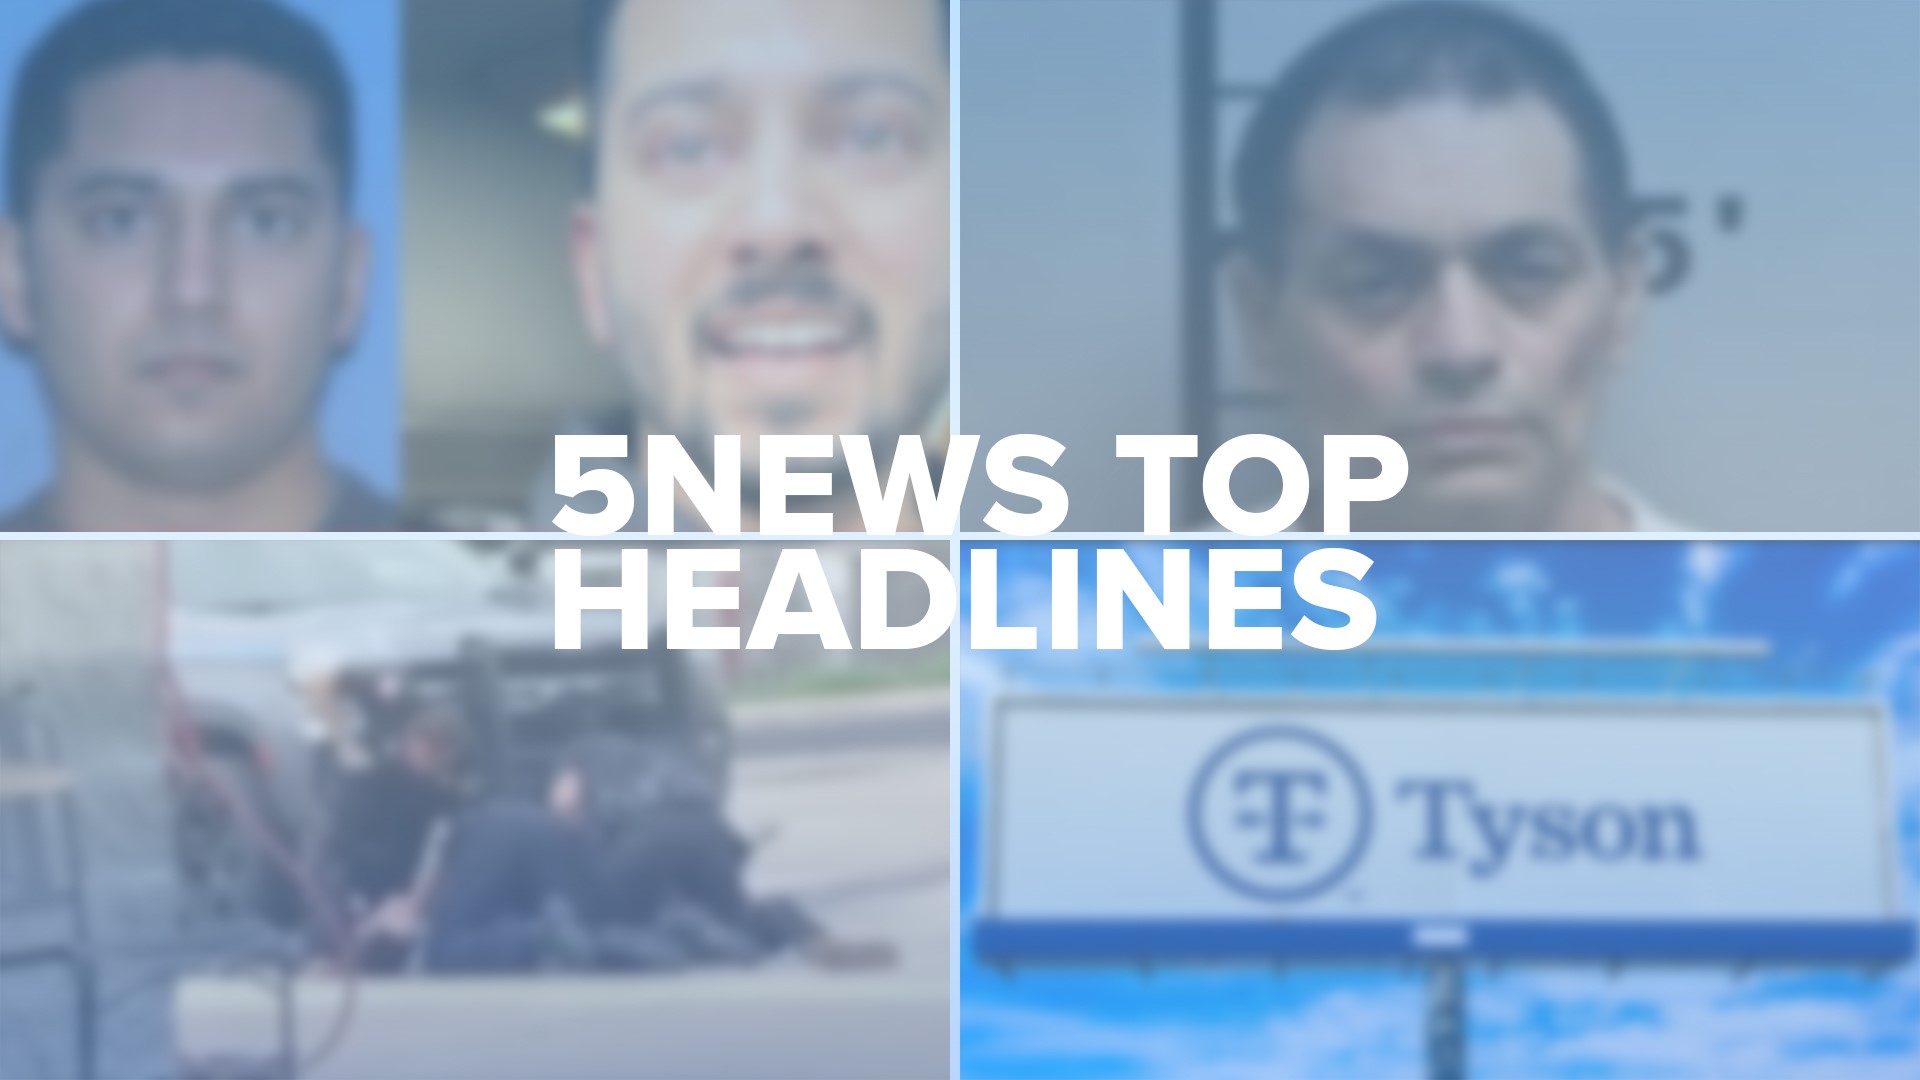 Check out today's top headlines for local news across our area.